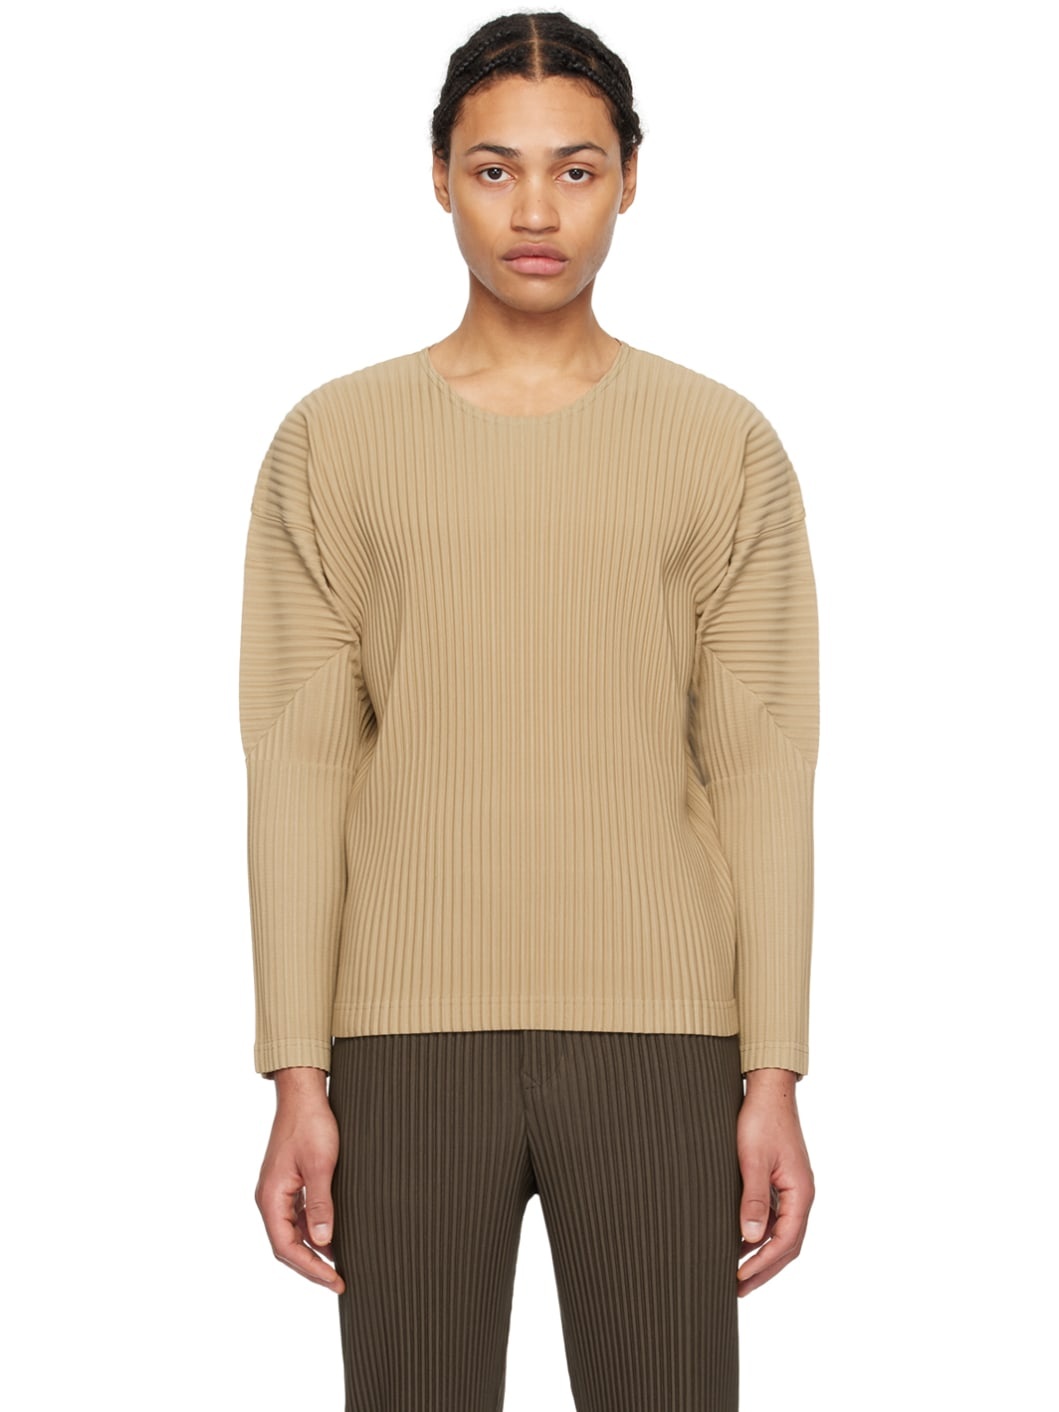 Beige Monthly Color February T-Shirt - 1